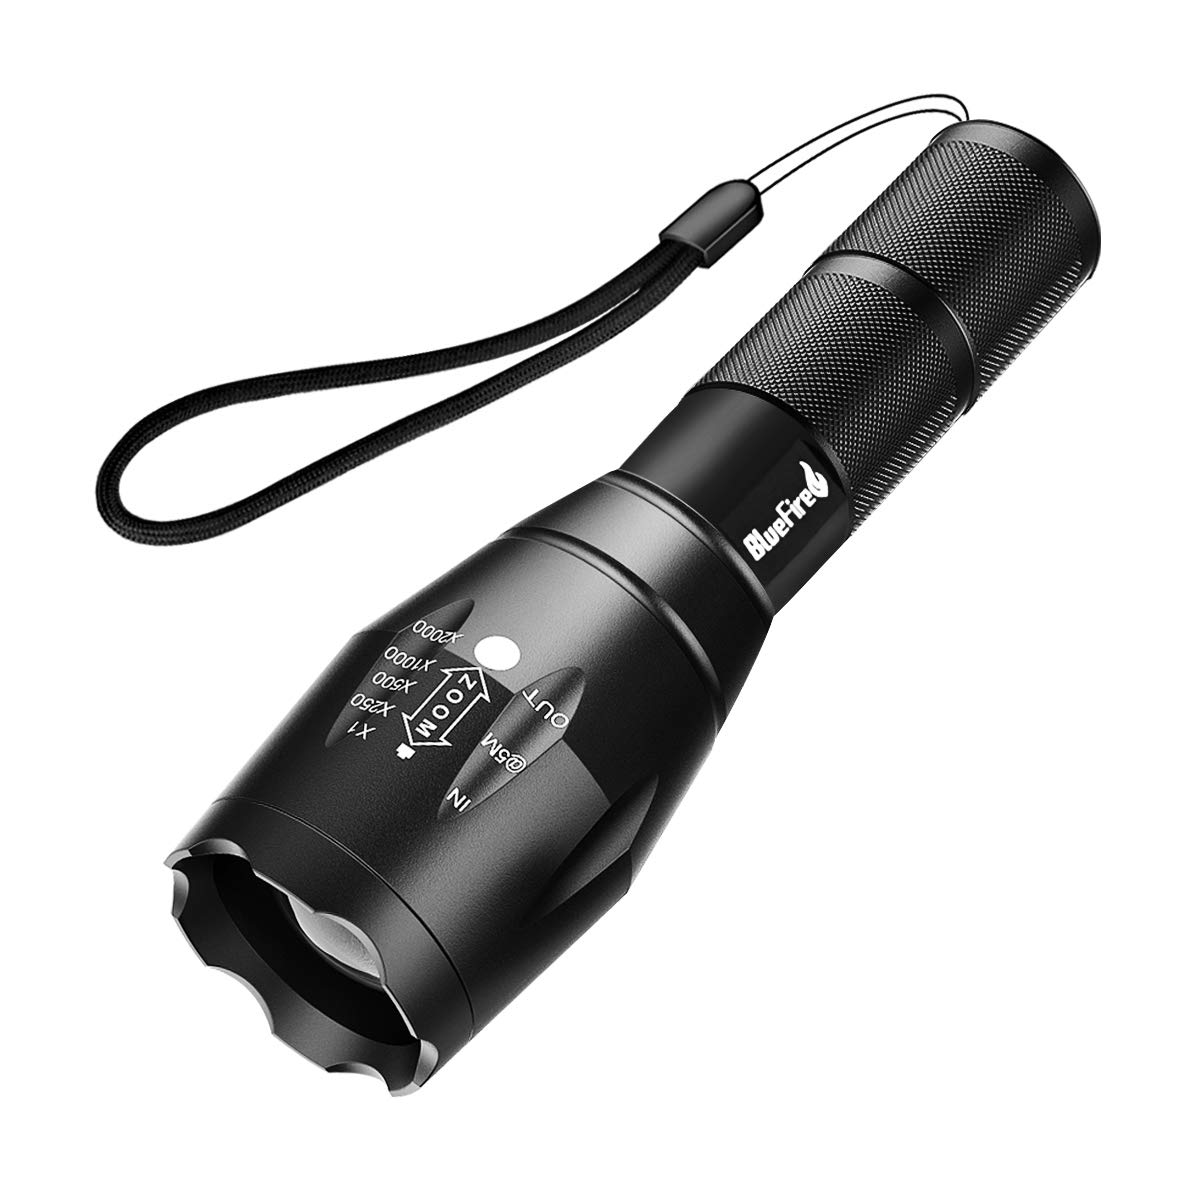 BlueFire 1200 Lumen Super Bright CREE XM-L2 LED Handheld Flashlight with Adjustable Focus and 5 Light Modes Tactical Flashlight for Camping & Hiking Outdoor Water Resistant Torch 